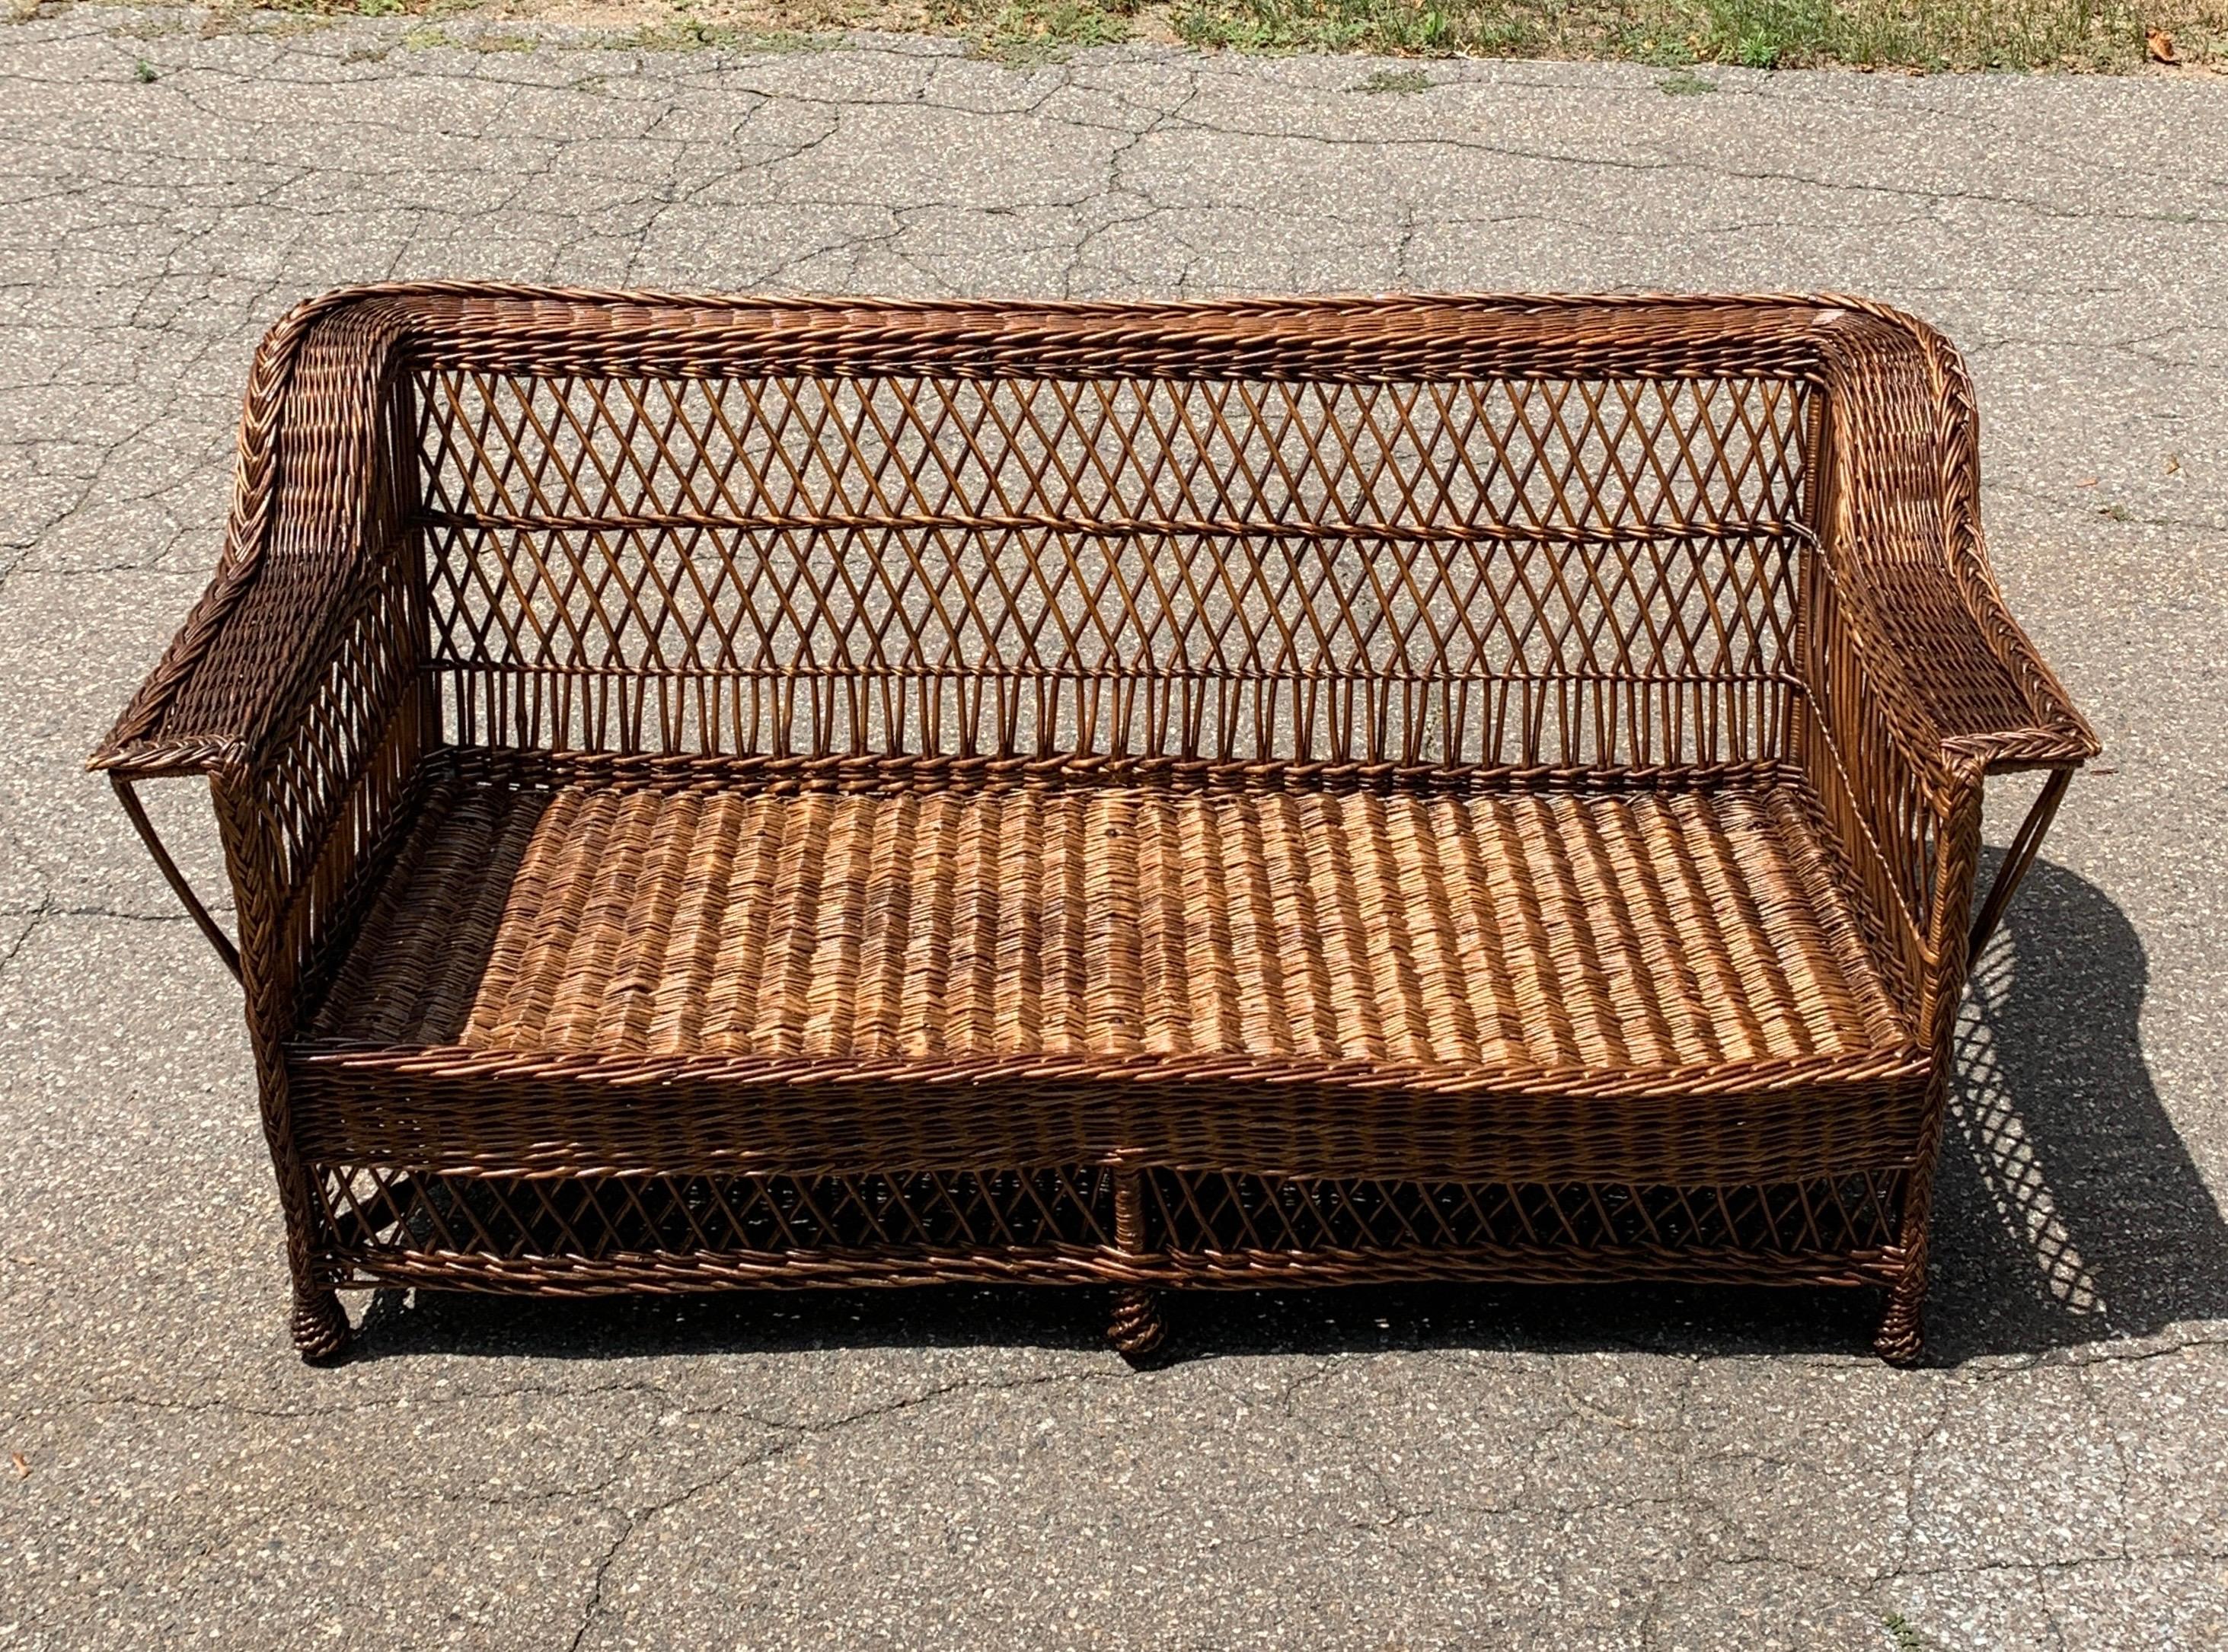 Antique wicker sofa woven of willow with a natural stain finish. Sofa measures 72